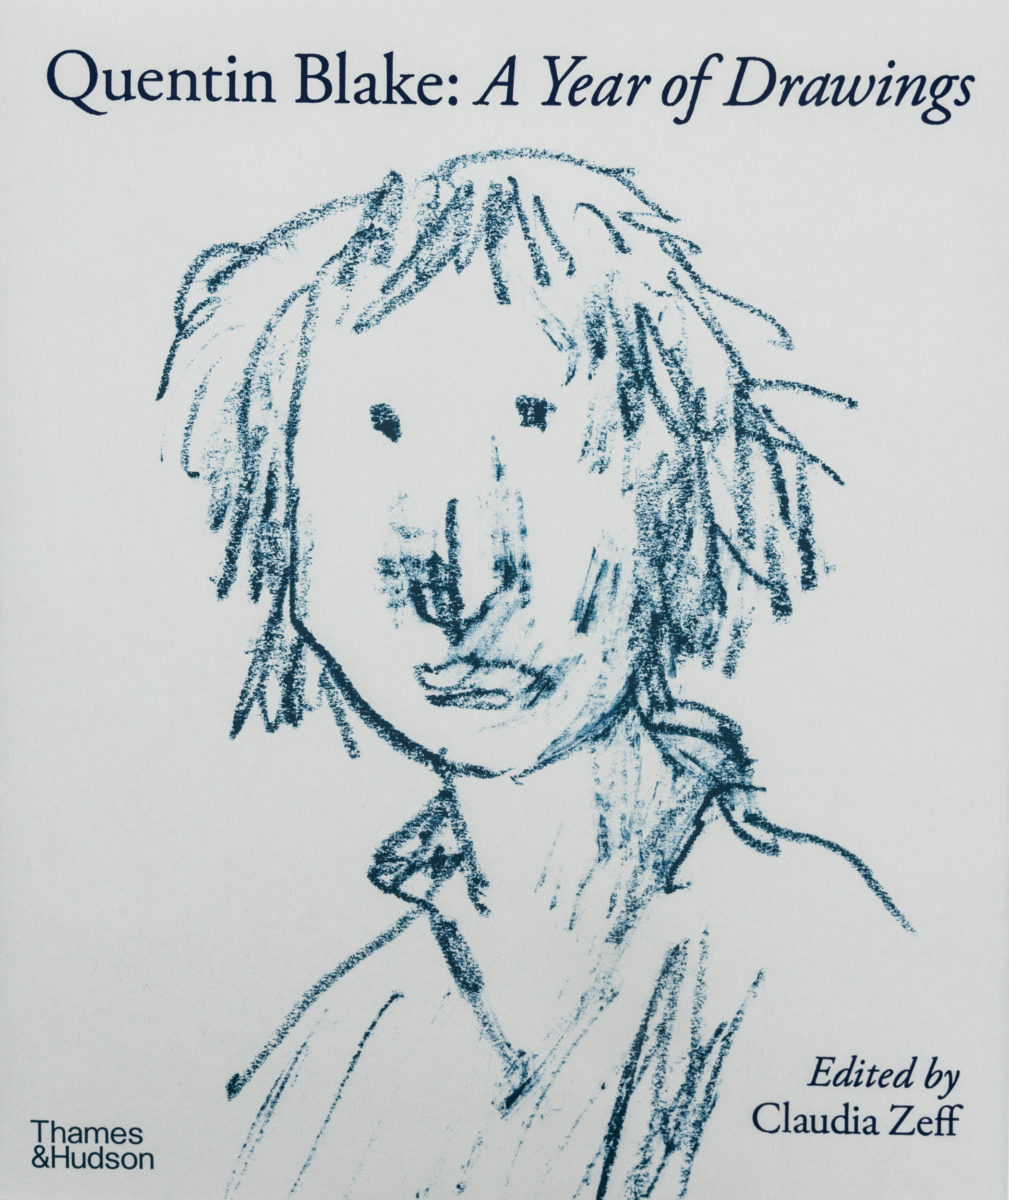 Quentin Blake, A Year of Drawings